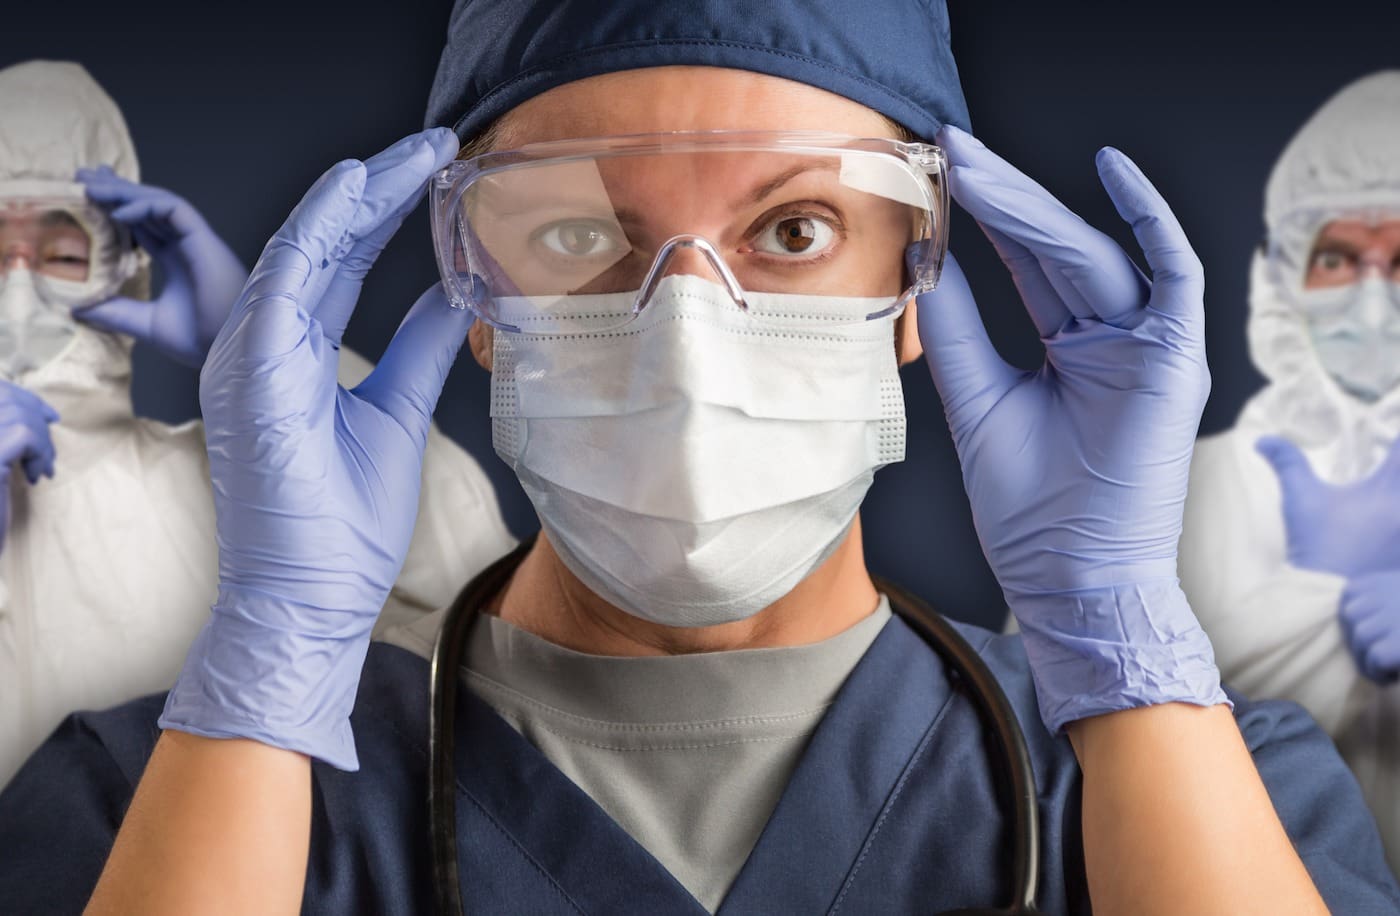 Should practice staff be wearing COVID-19 personal protective equipment (PPE)?